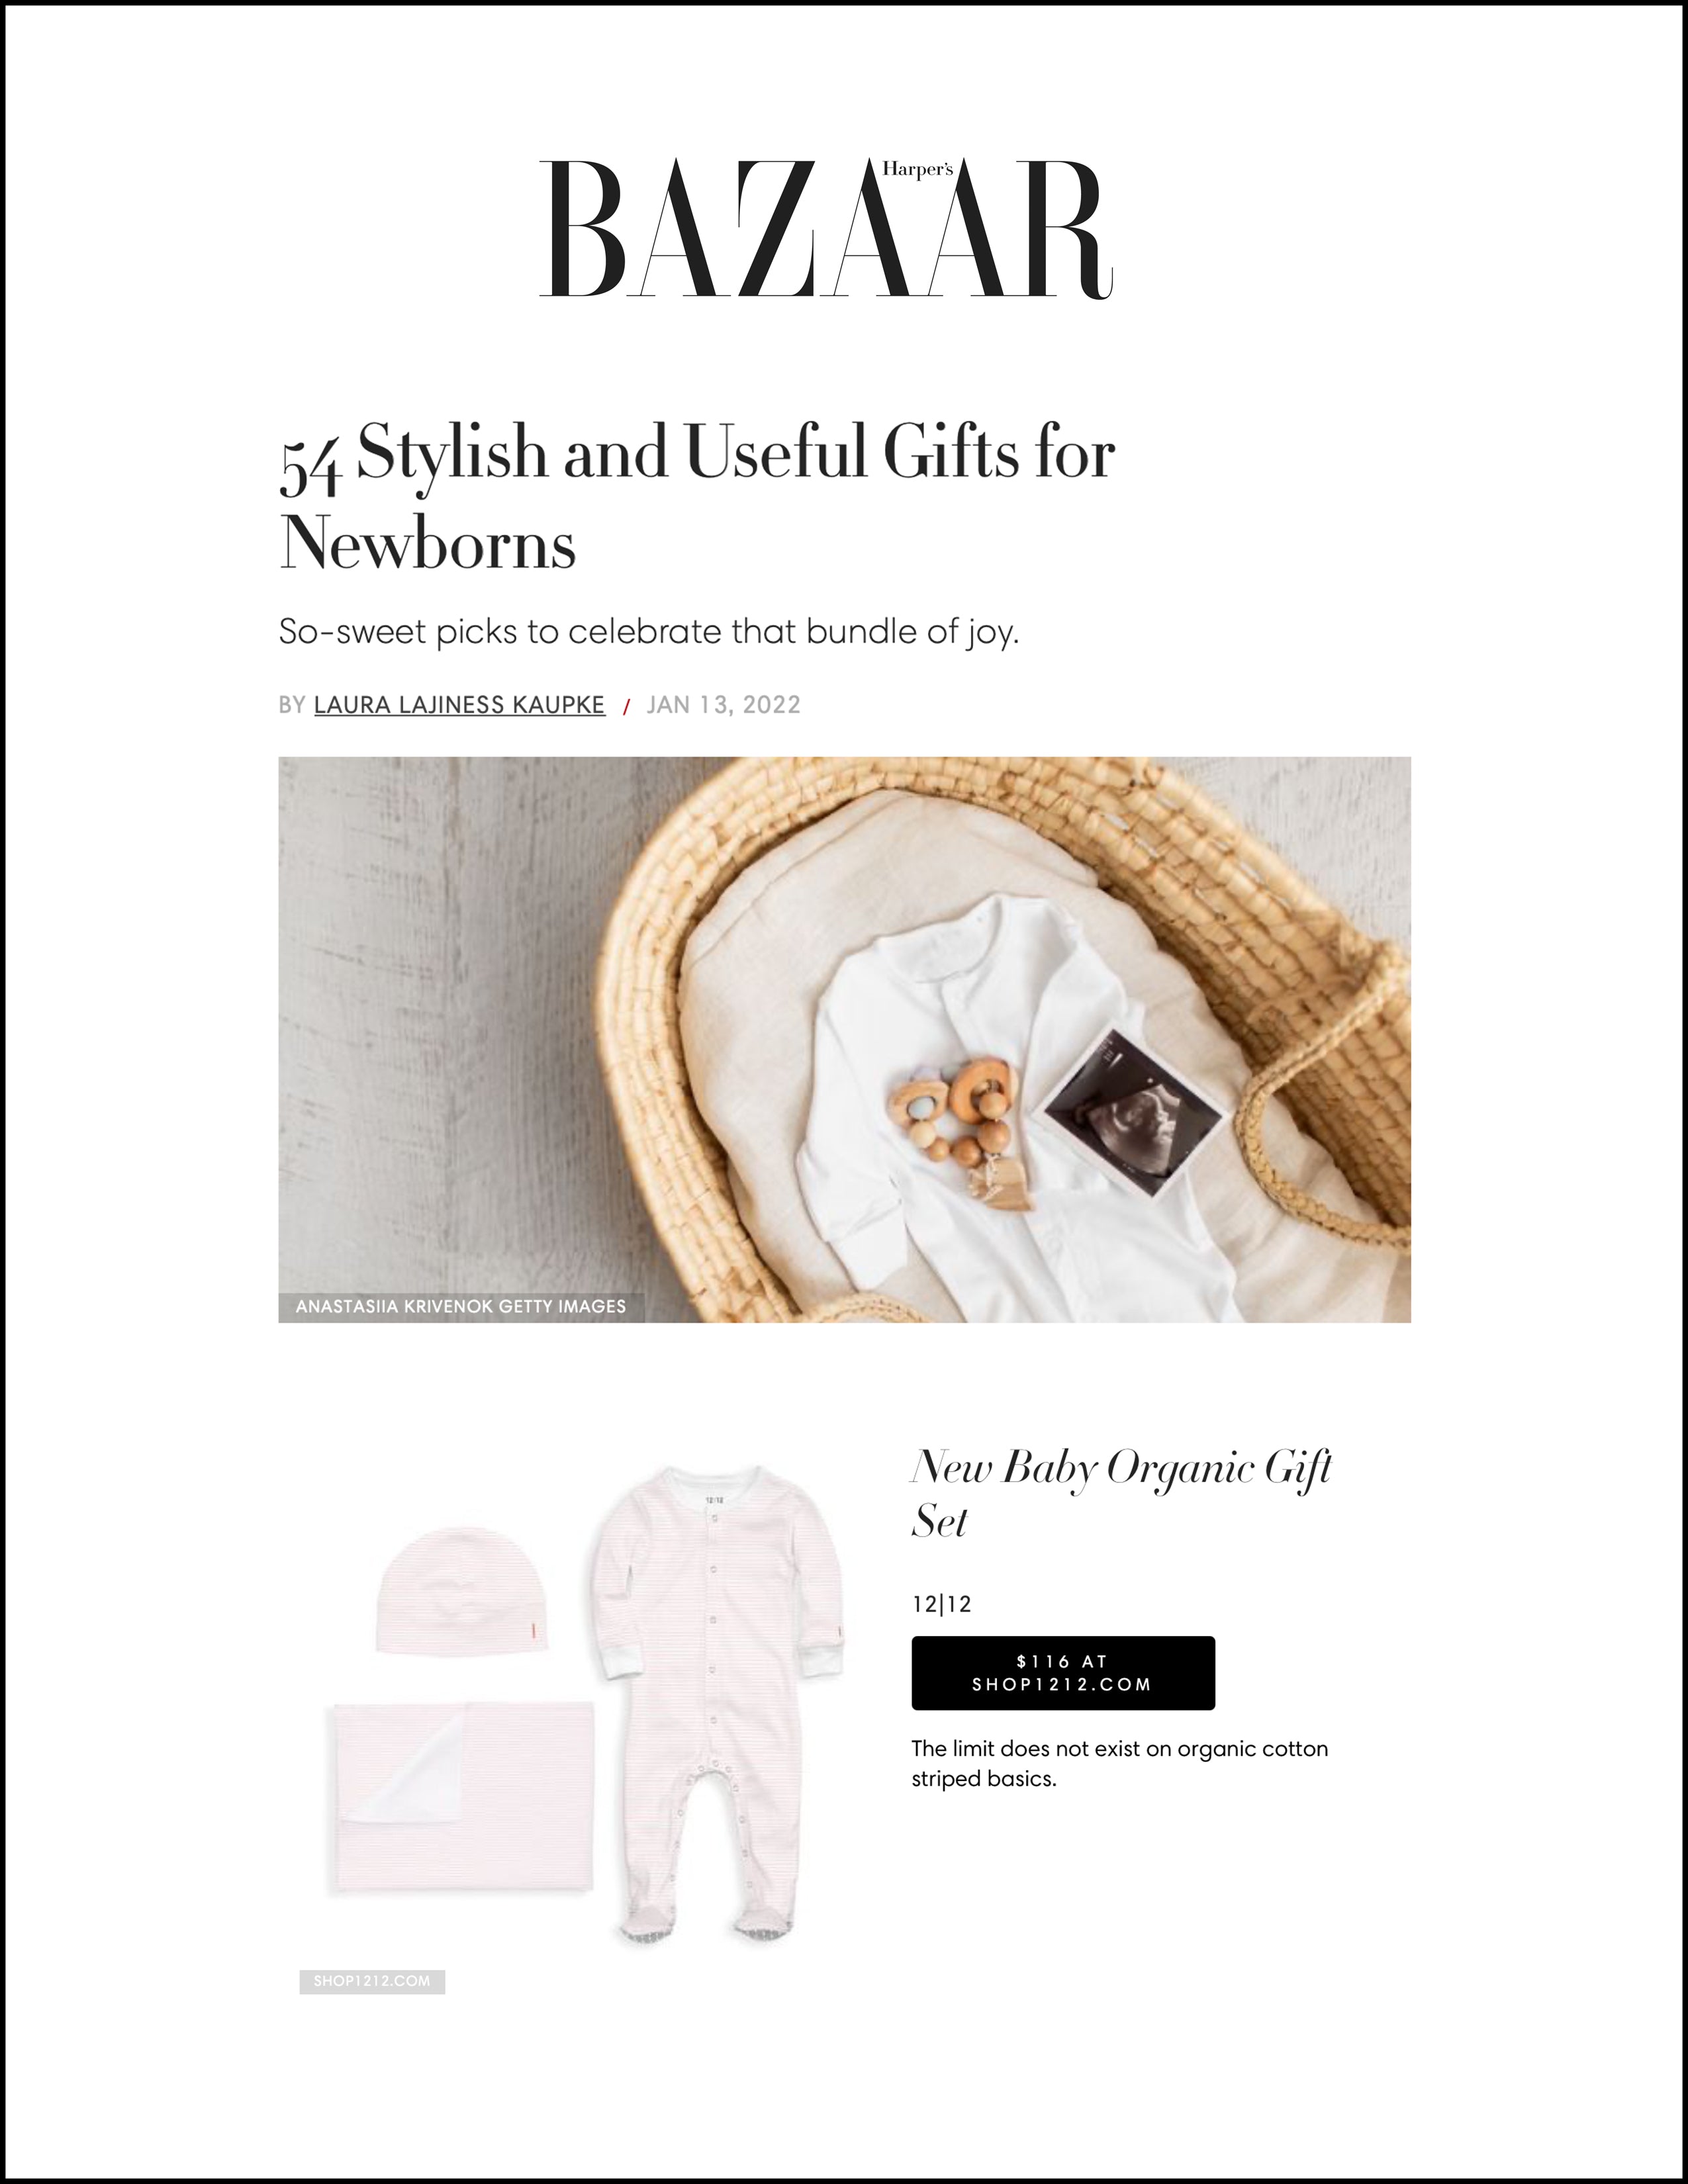 12|12 on Harper's Bazaar list of 54 Stylish and Useful Gifts for Newborns